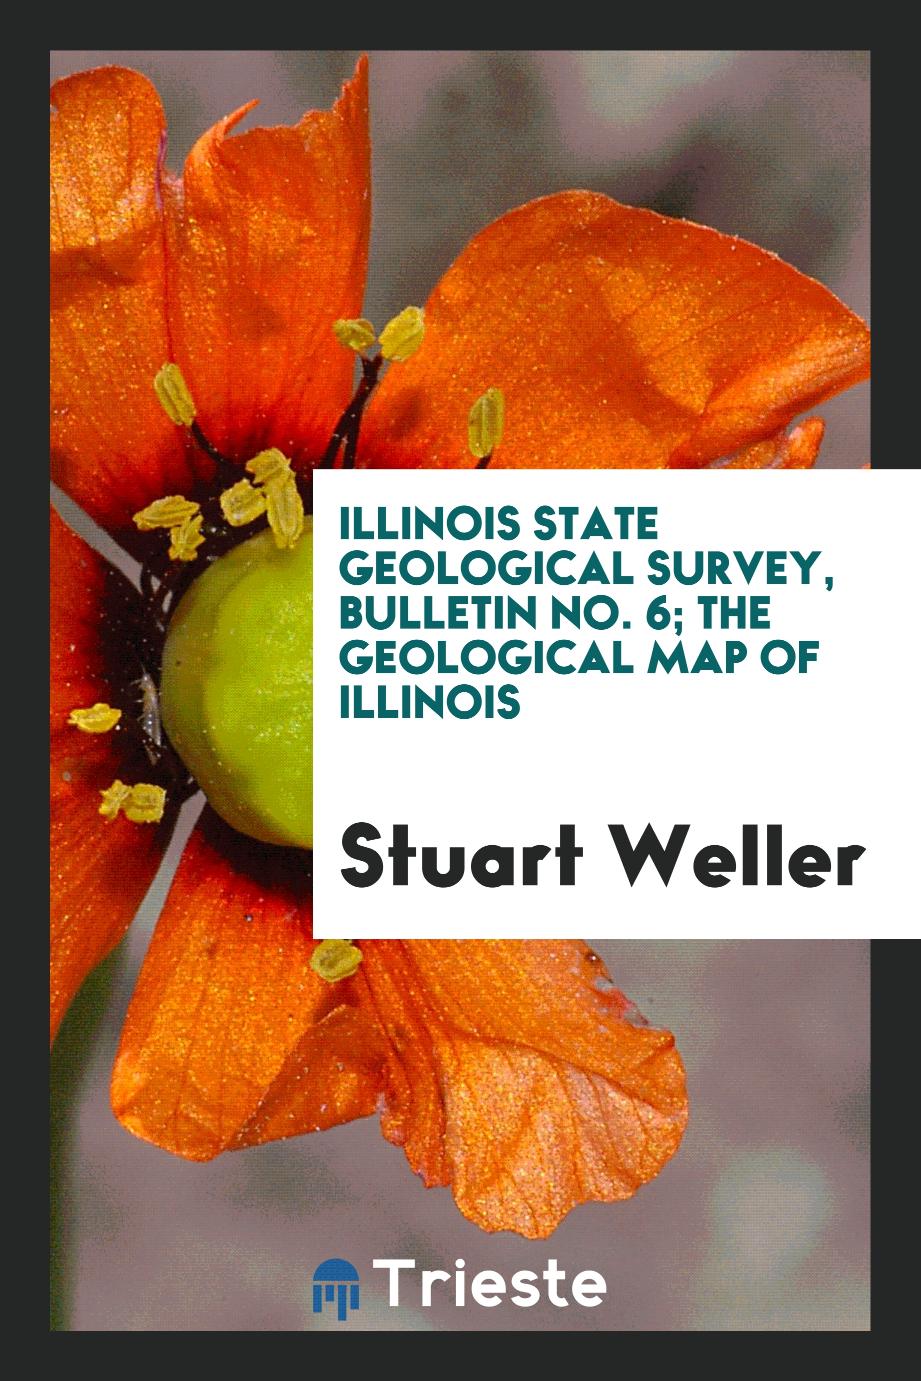 Stuart Weller - Illinois State Geological Survey, Bulletin No. 6; The Geological Map of Illinois